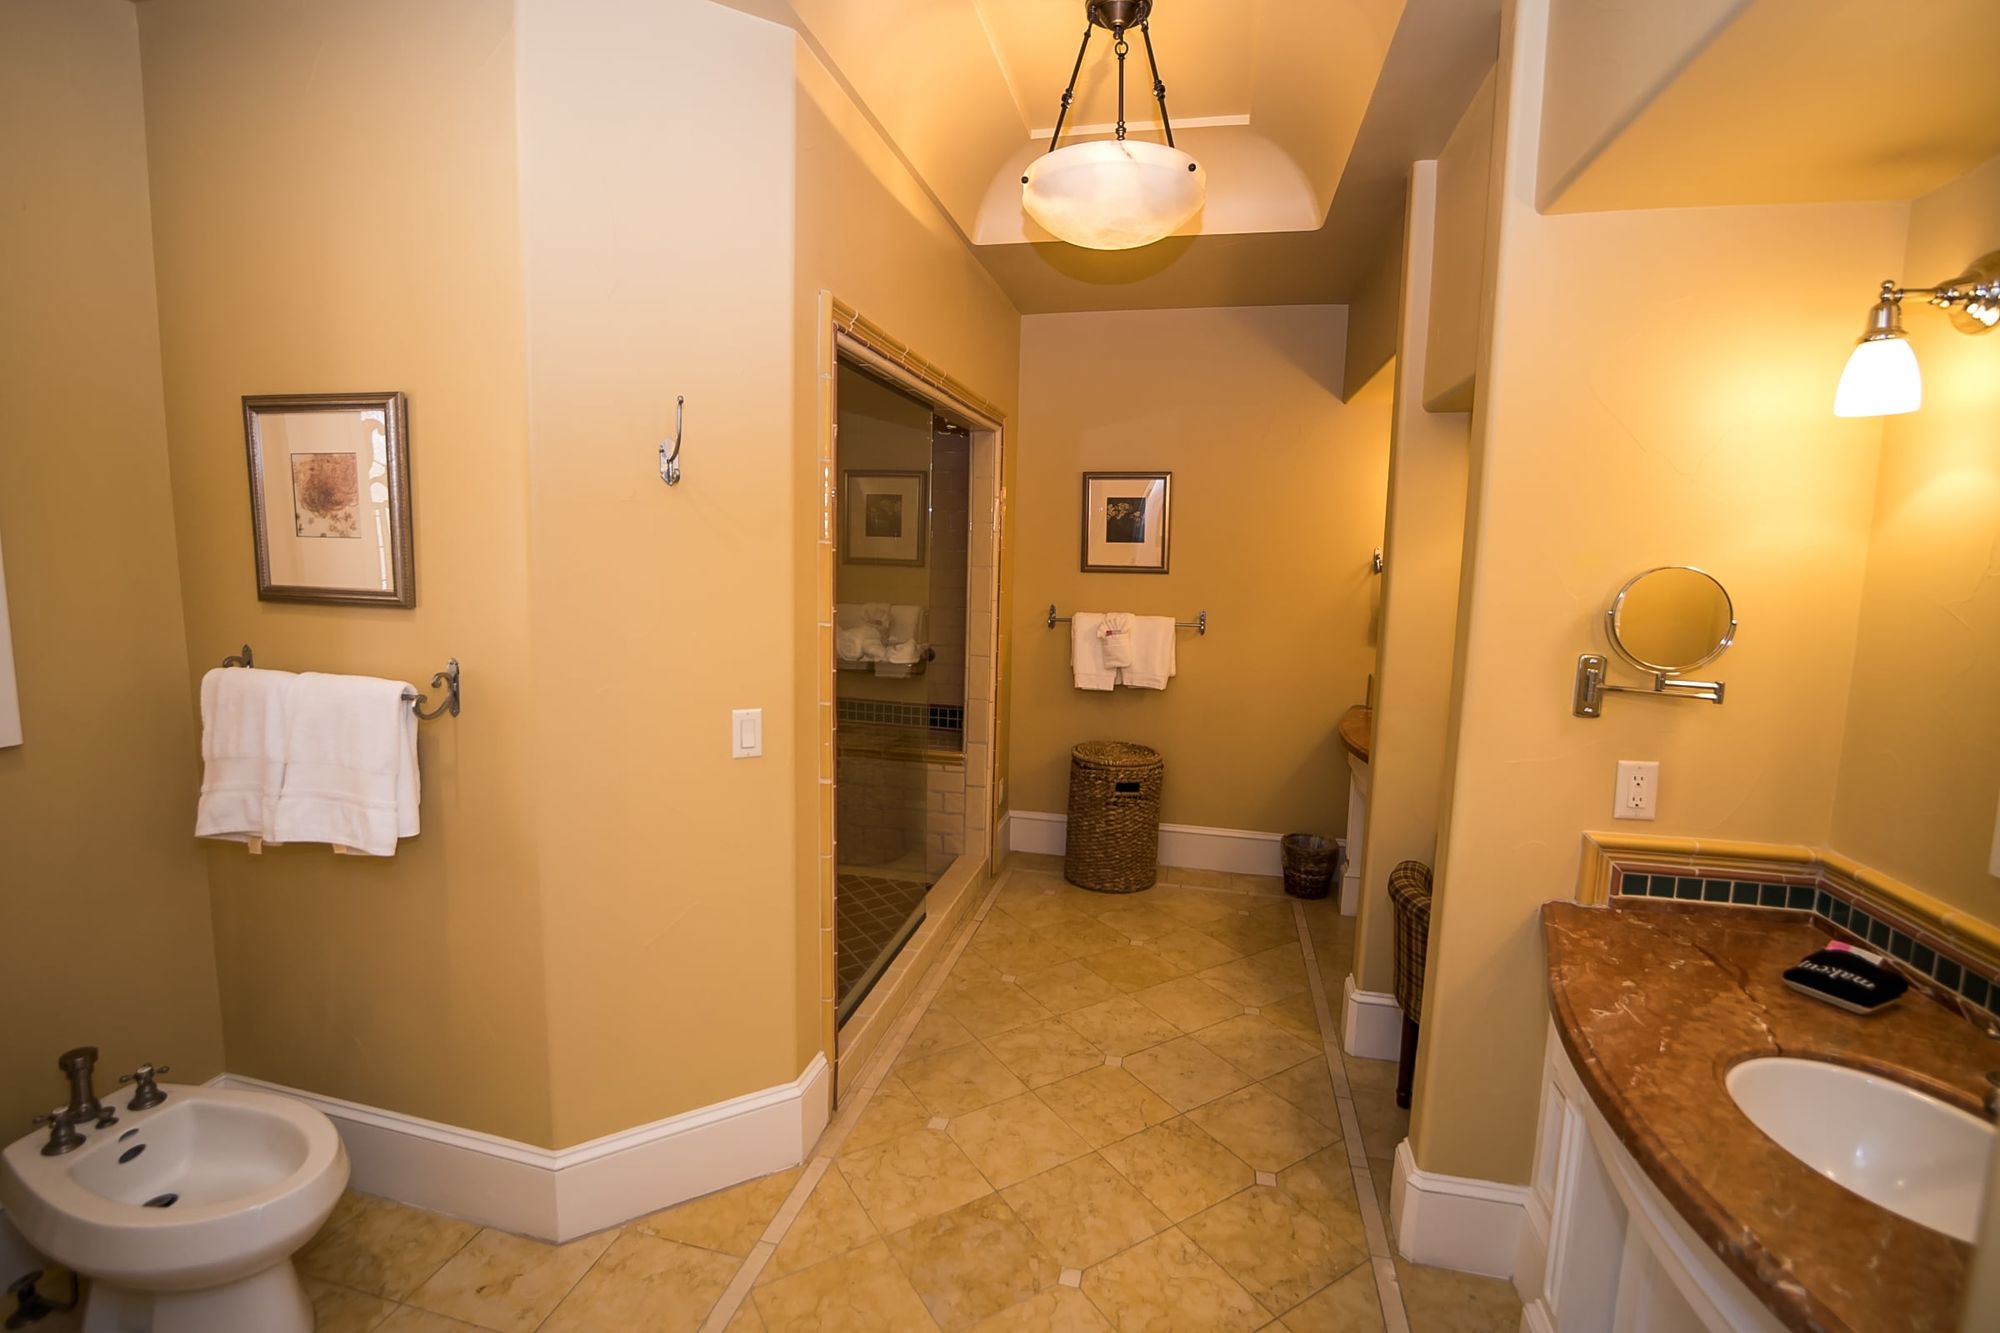 Bathroom with bidet to left and vanity to the right